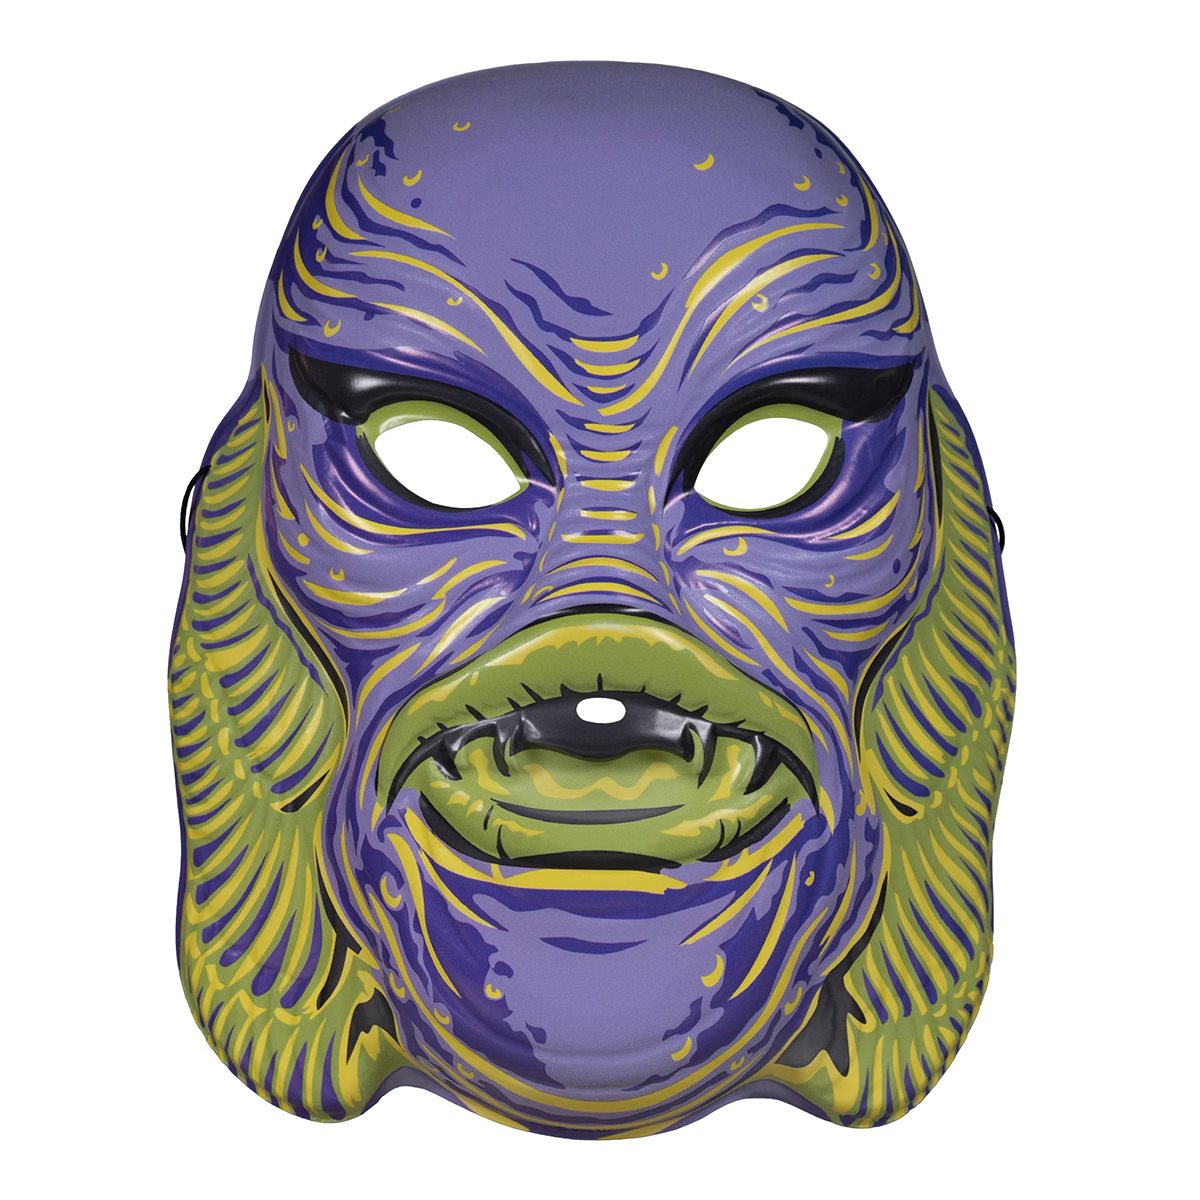 Creature From The Black Lagoon (Glow) Mask